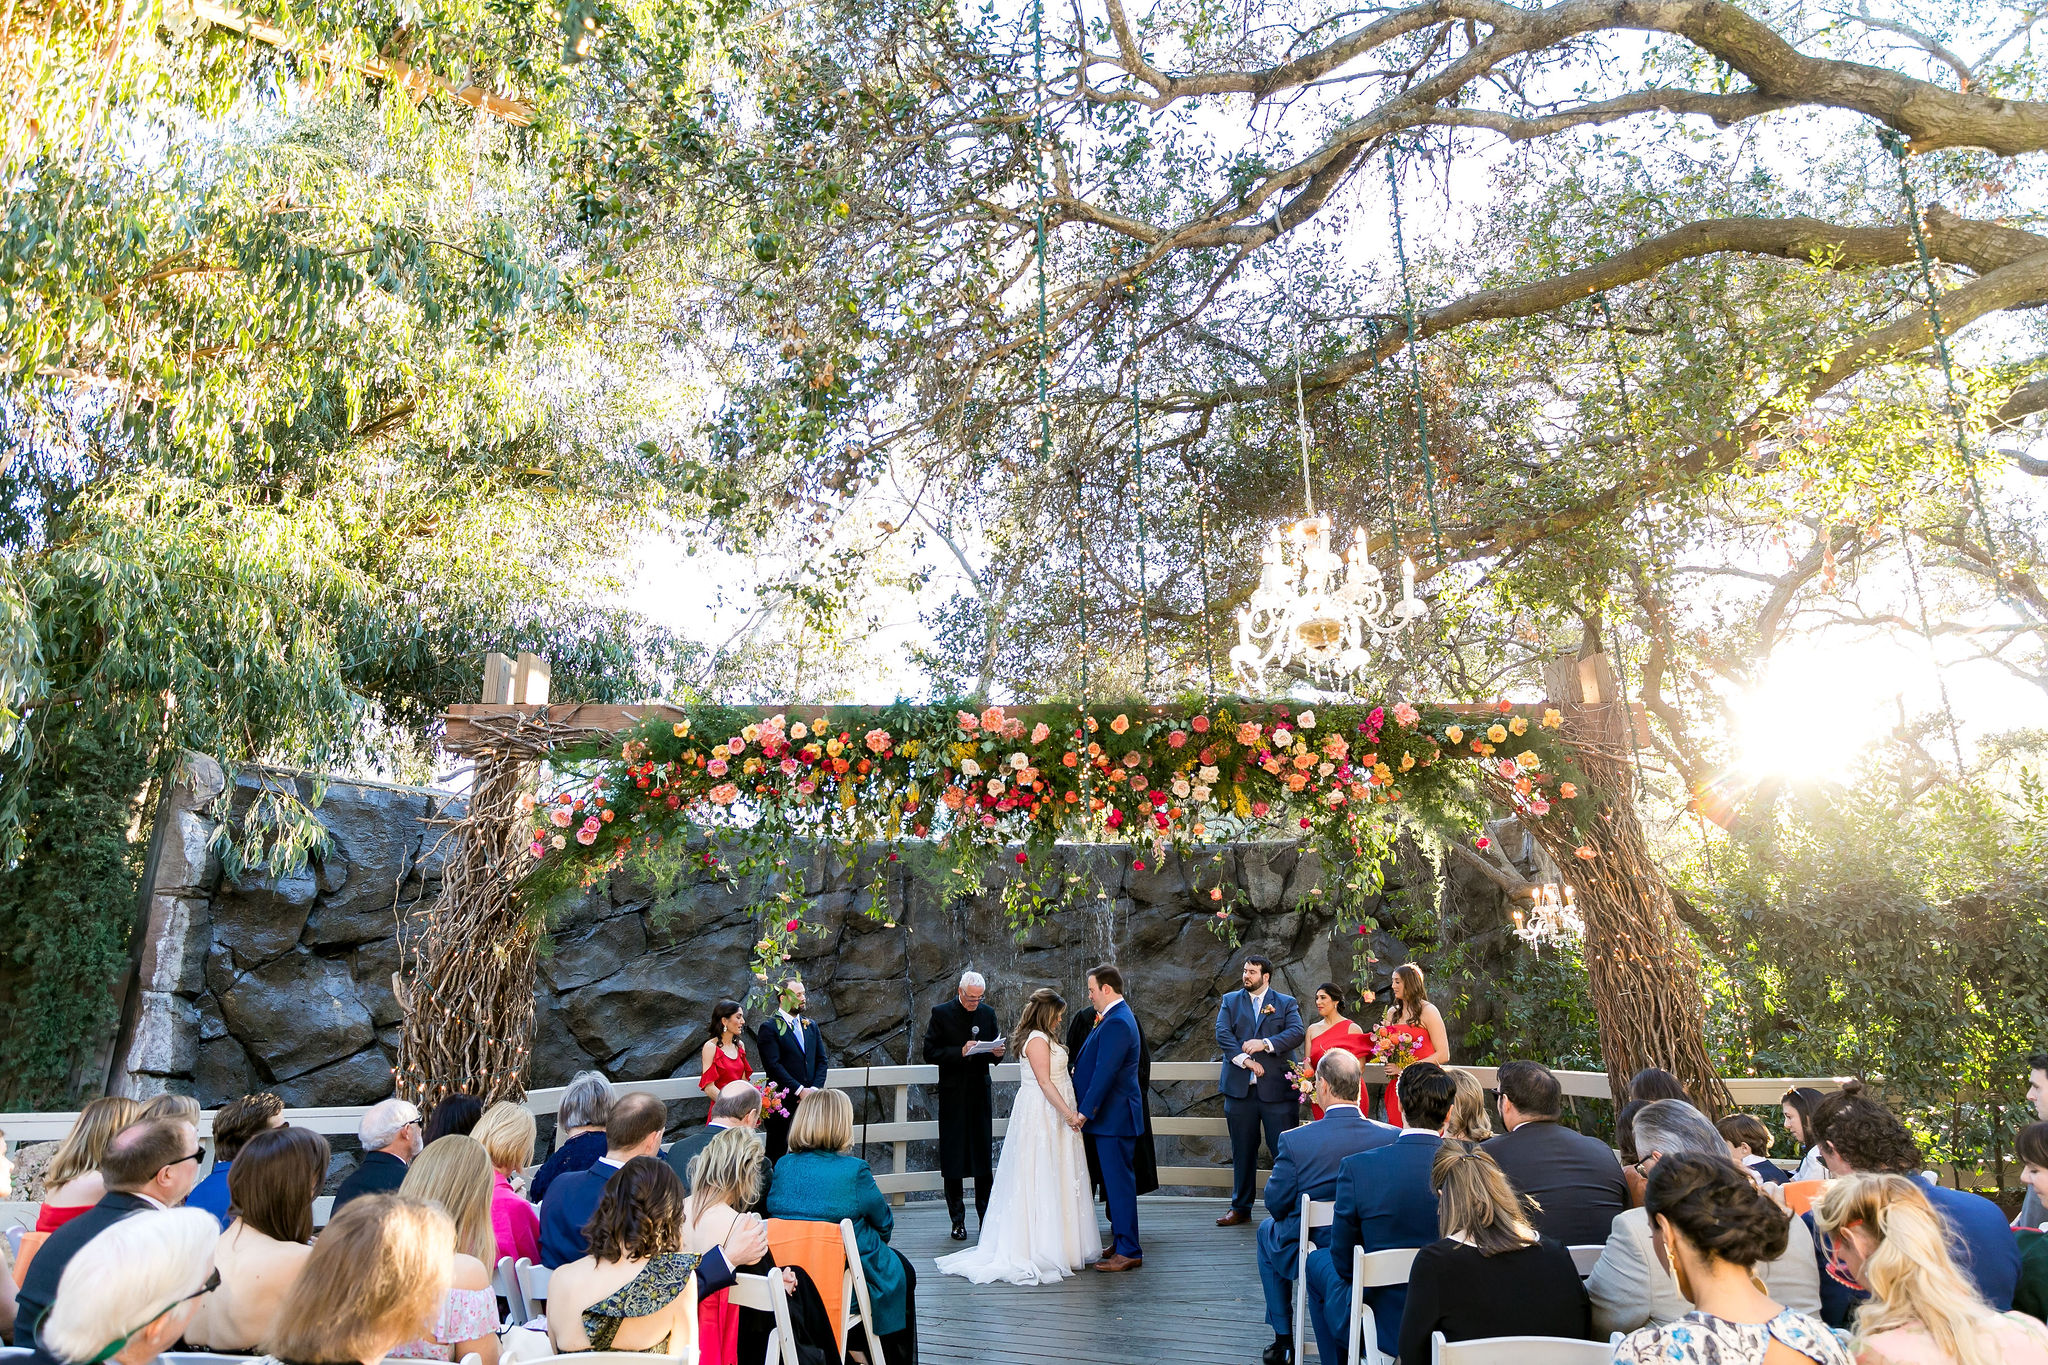 bright and energetic wedding ceremony at the Oak Room at Calamigos Ranch with bright red, pink, orange and white florals hanging in front of waterfall